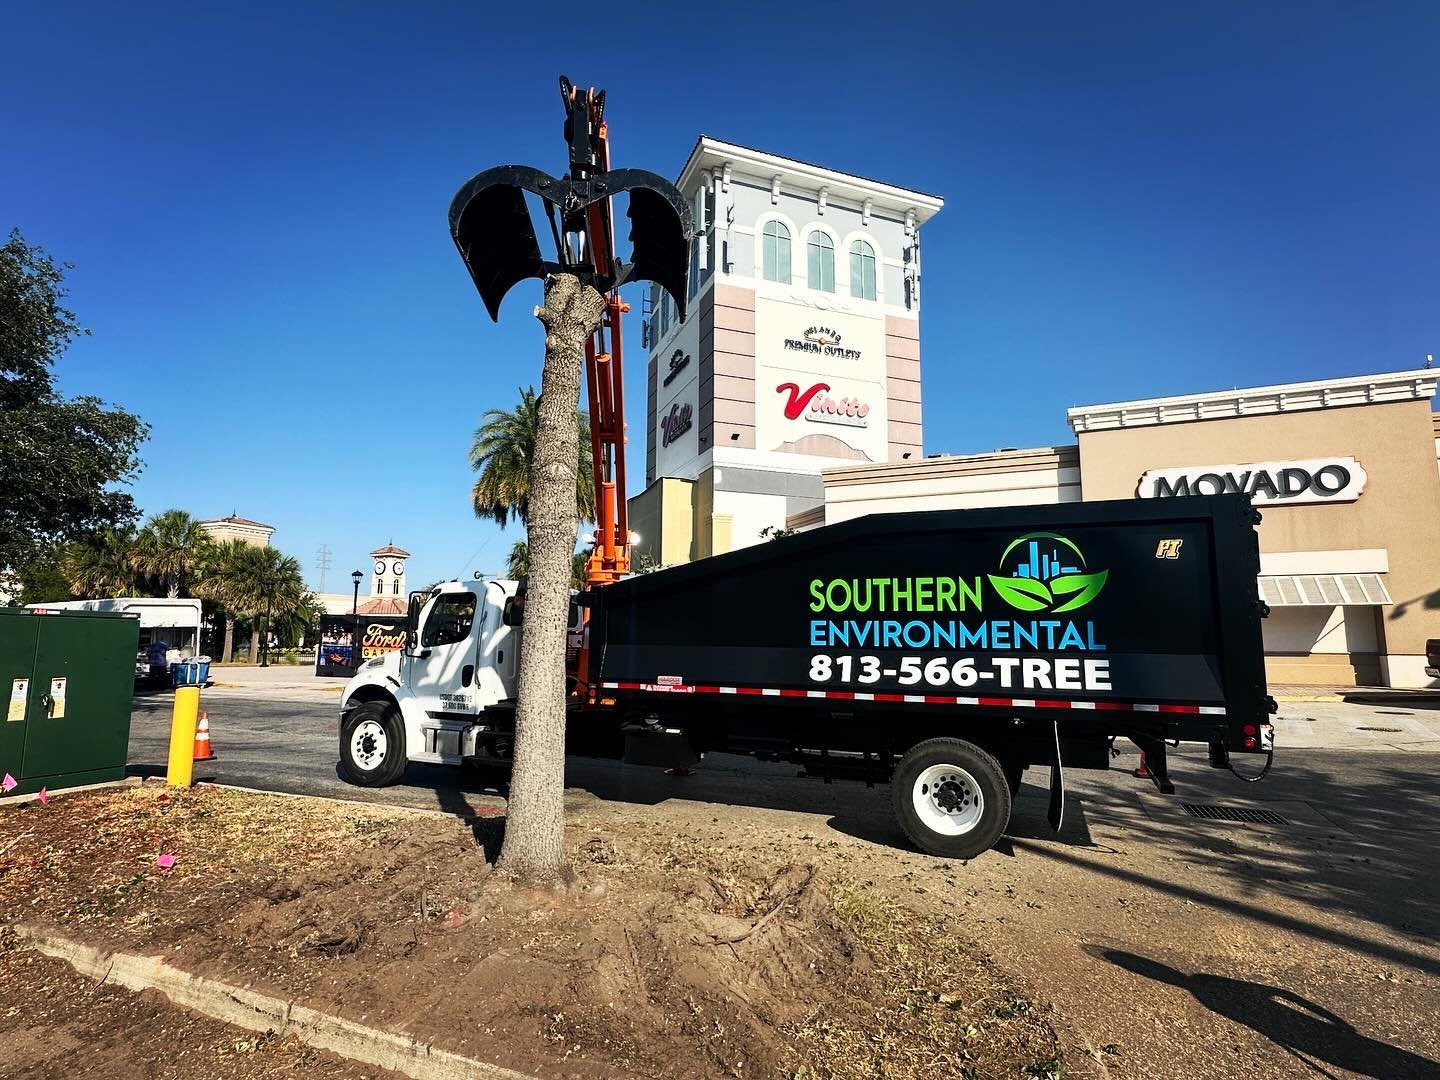 Conducting tree removal for an additional electrical panel install. #treeremovalexperts #treeremovals #treetrimming #treetrim #commercialtreeremoval 
#callbeforeyoudig #undergroundlocating